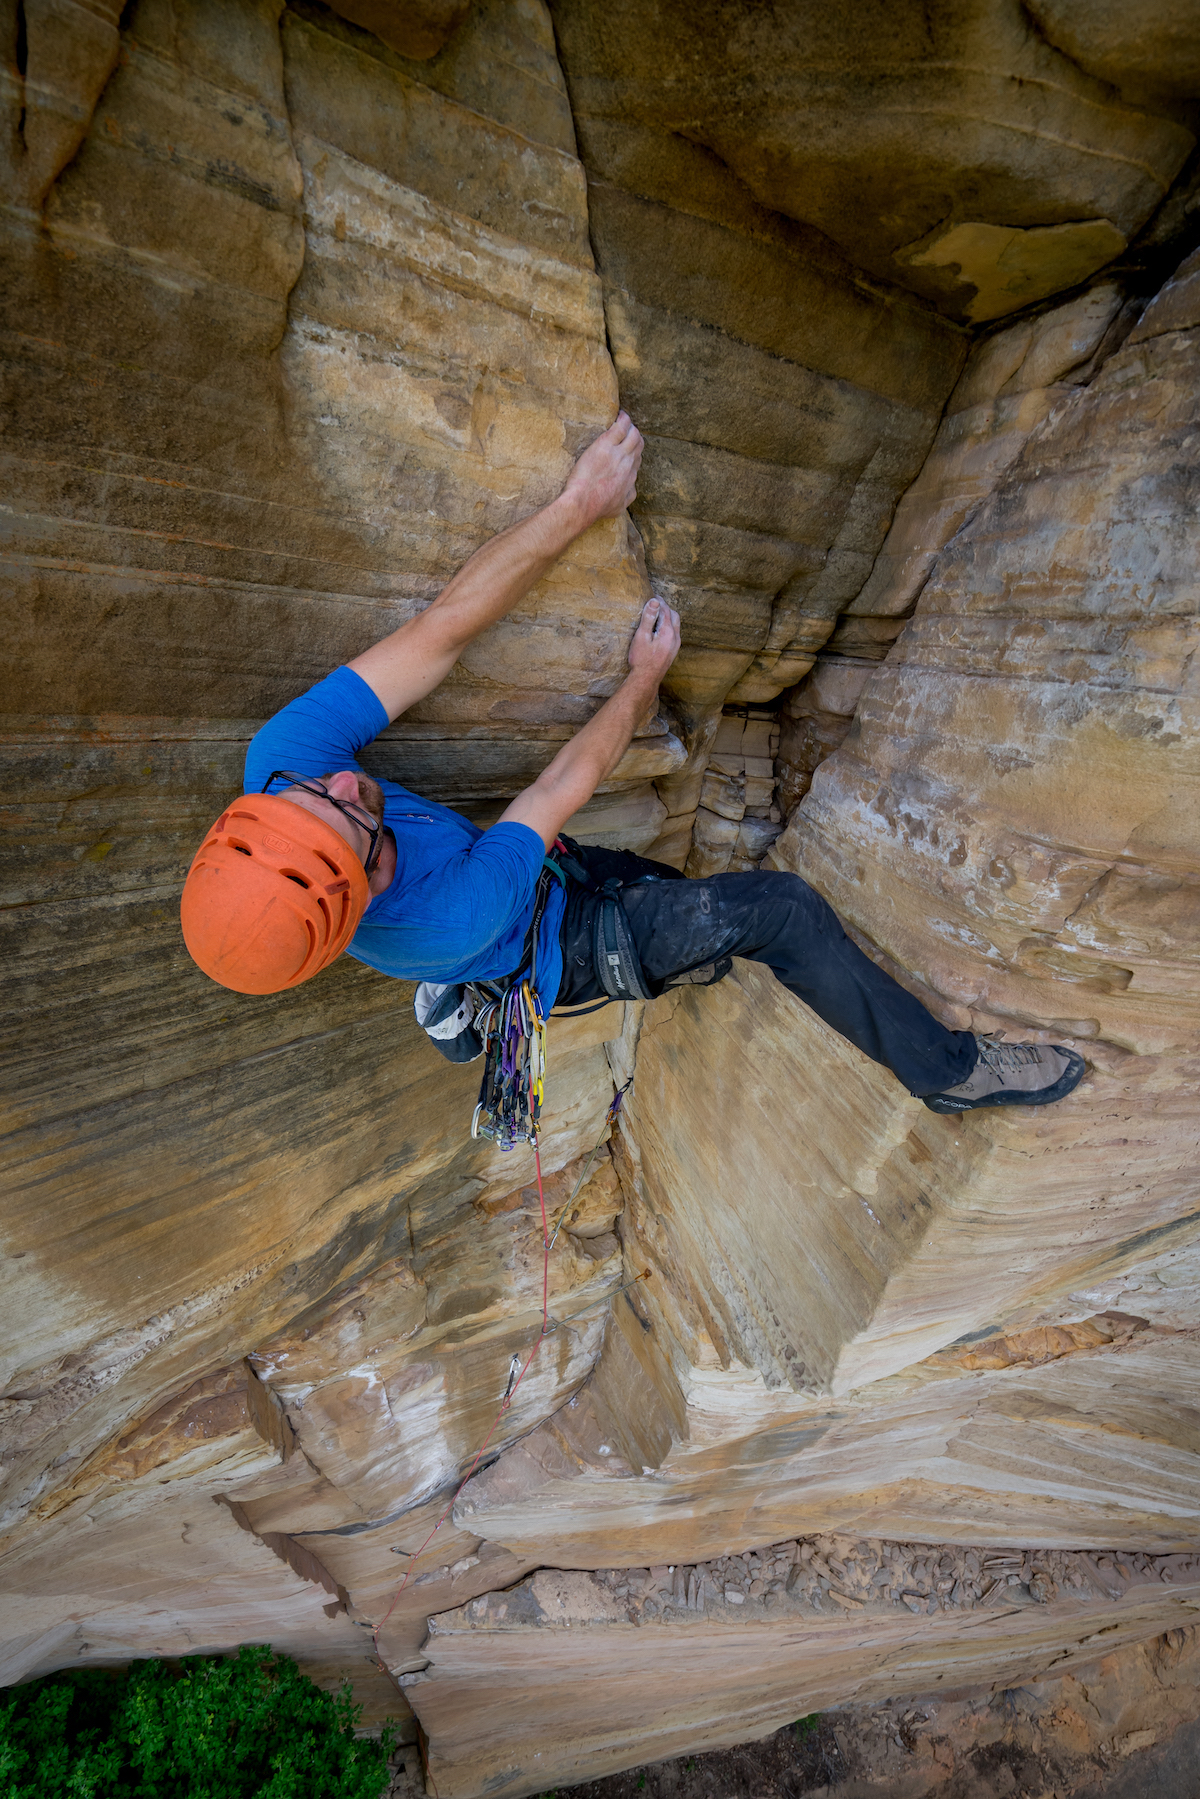 Chris Kalman sporting the Acopa JBs on his and Zach Harrison's new route, Pump Drunk (5.12-, 115') in Northern Arizona's Pumphouse Wash (ancestral homelands of Pueblo, Sinagua, Hohokam, Hopi and Western Apache, among others). [Nelson Klein]